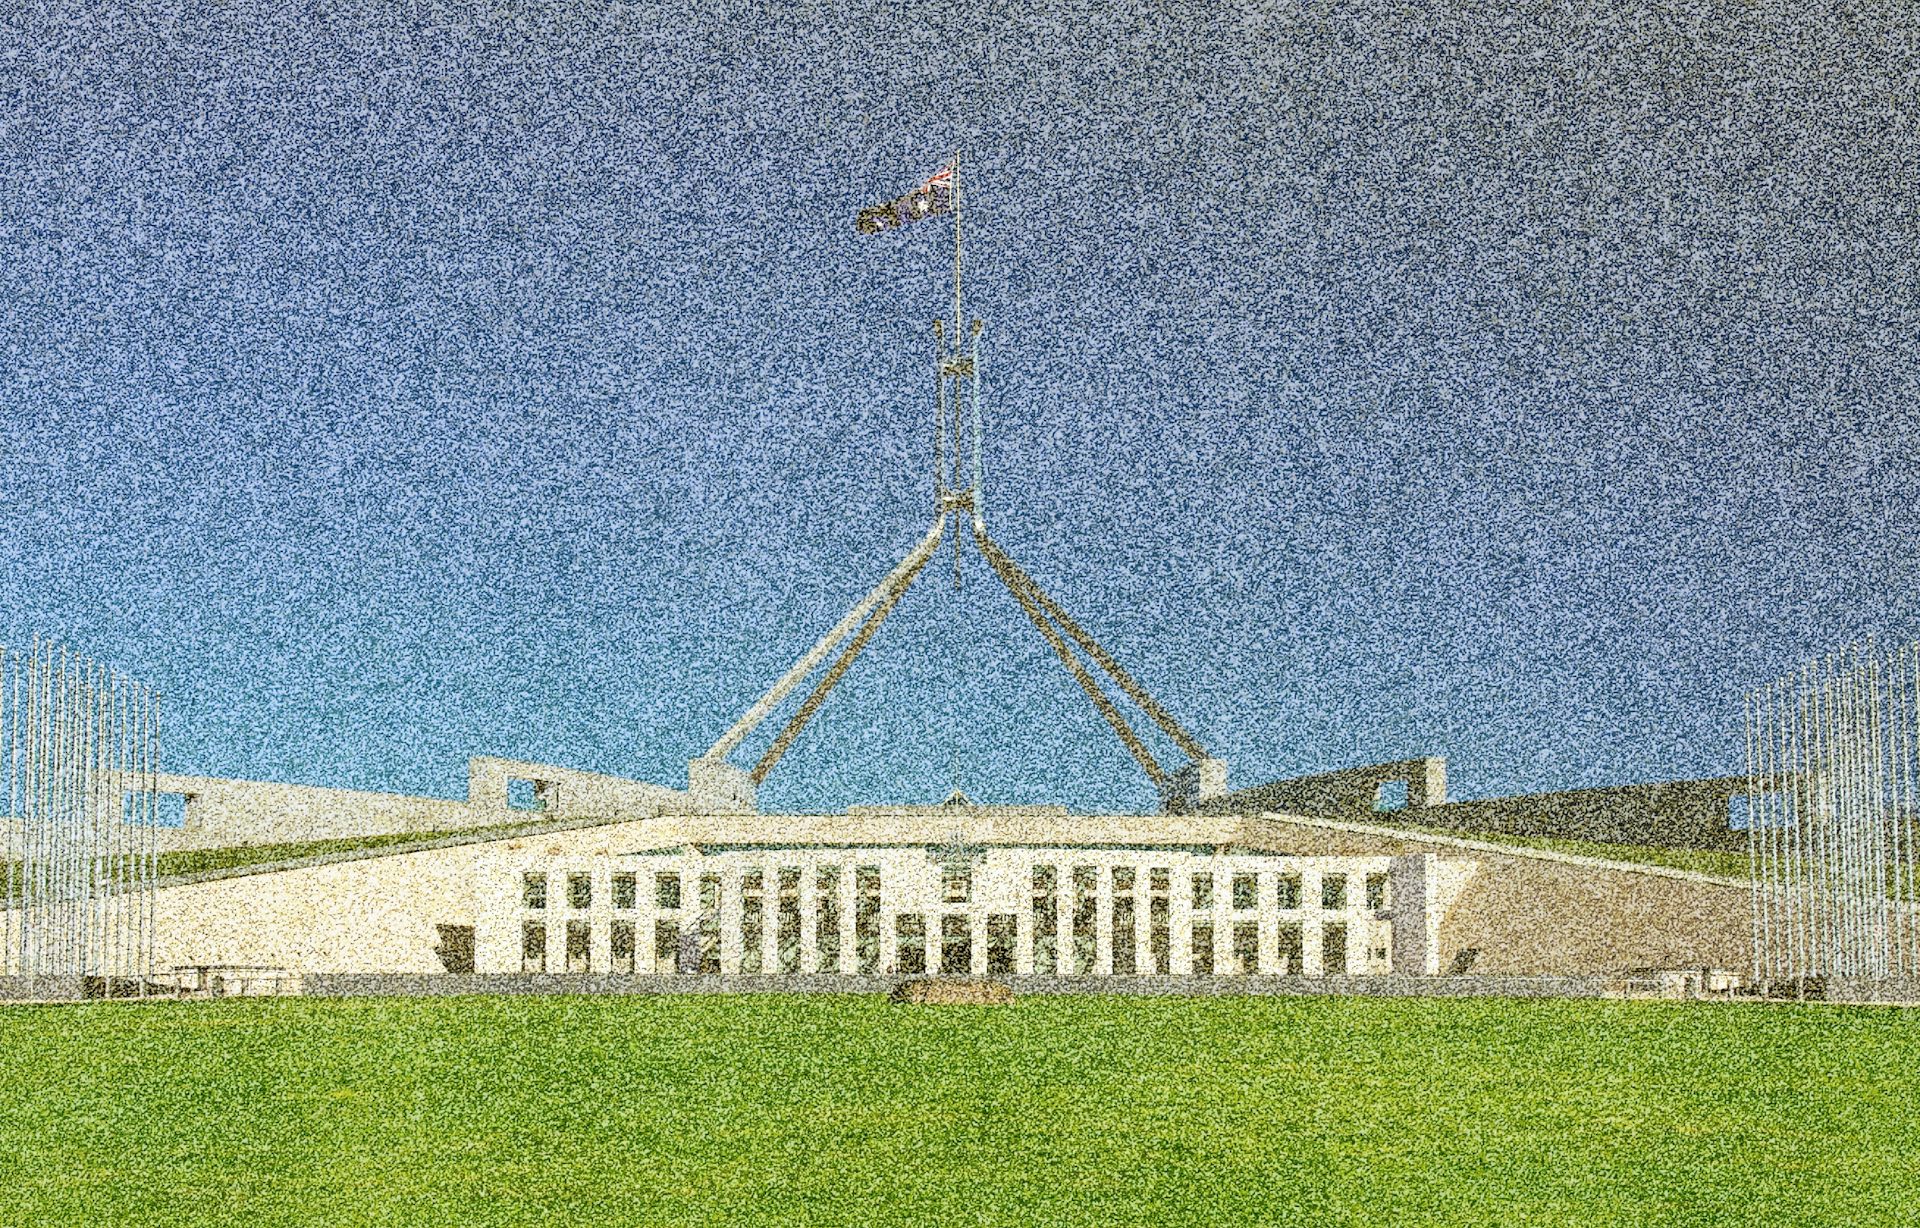 The Impact of AI on Australian Democracy: How Can We Respond?